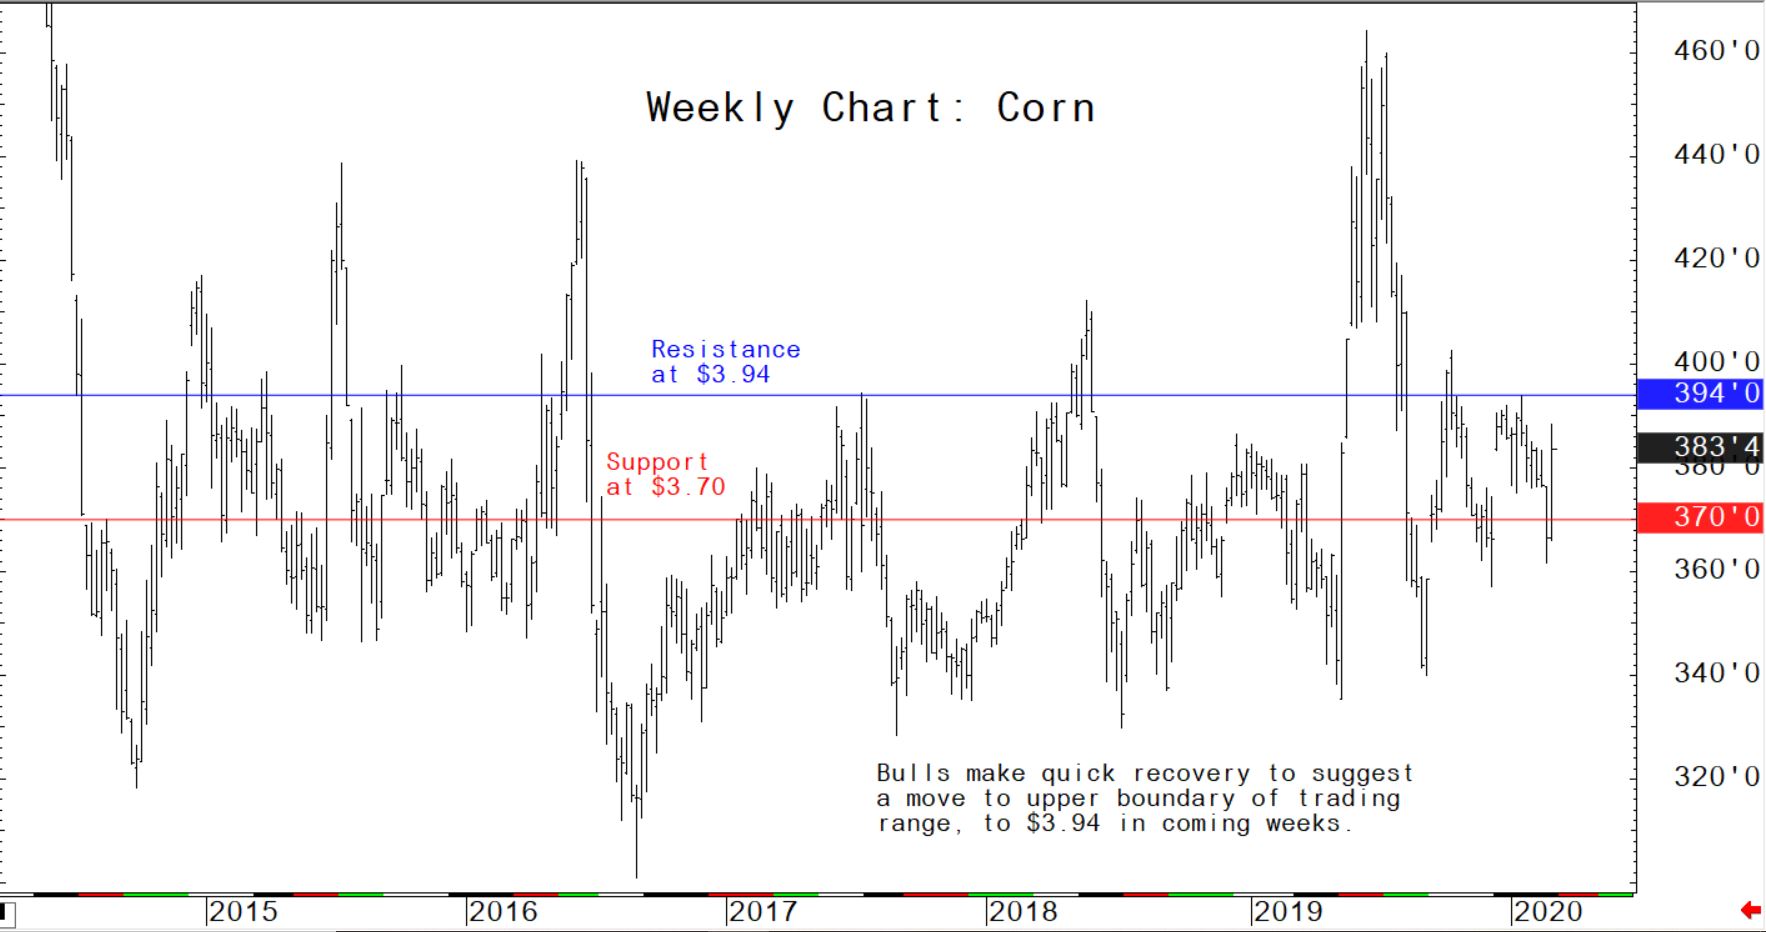 Bulls make quick recovery to suggest a move to upper boundary of trading range to $3.94 in coming weeks